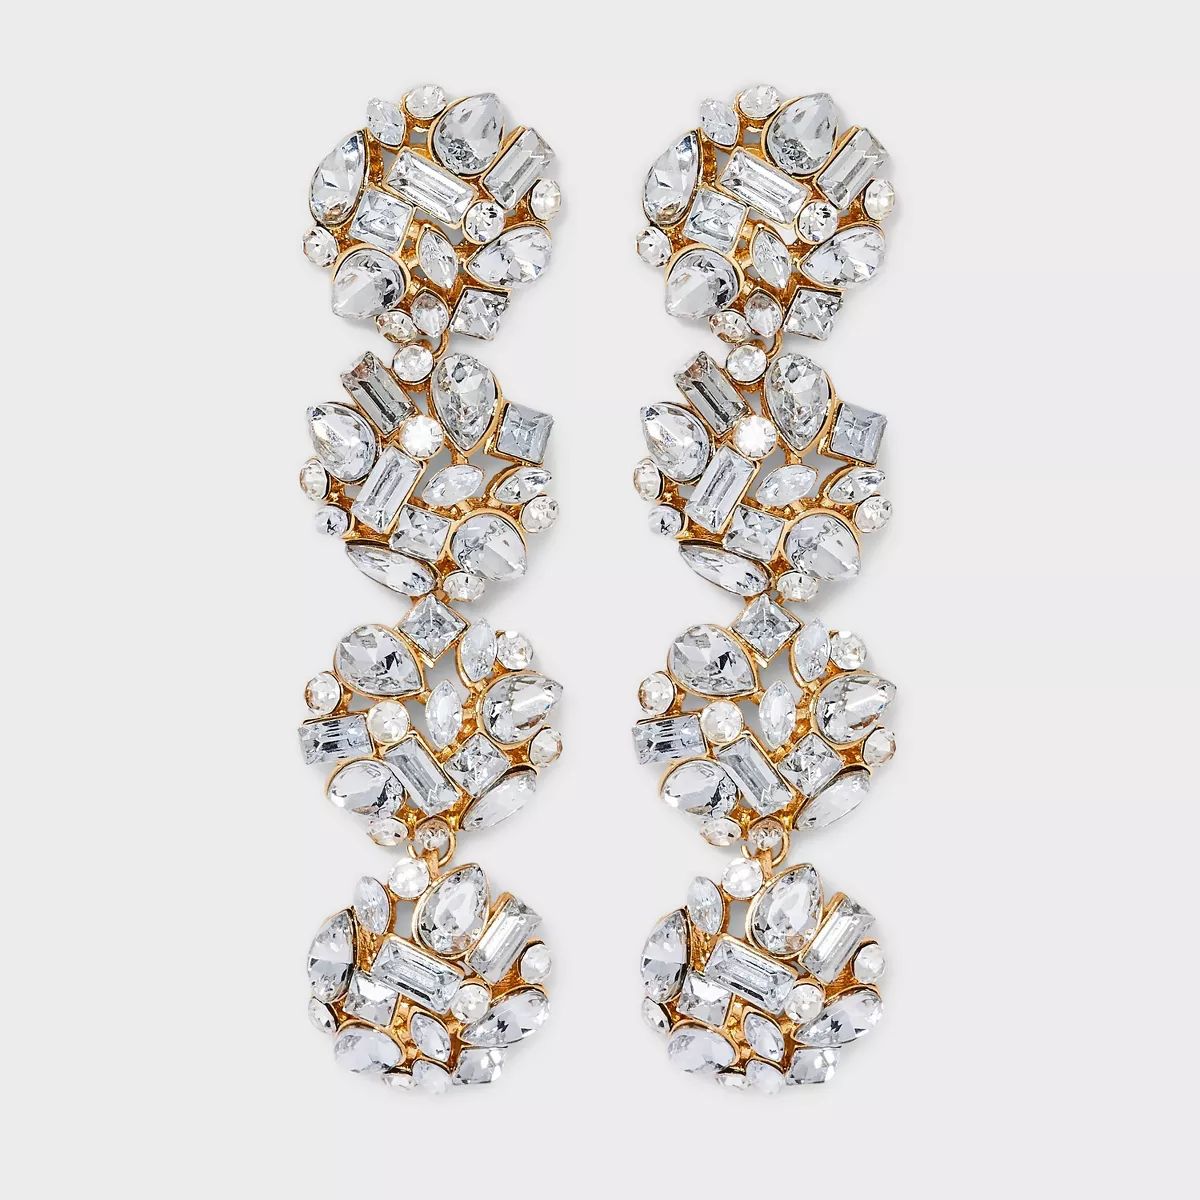 SUGARFIX by BaubleBar "Crystal Cluster" Statement Drop Earrings - Gold | Target